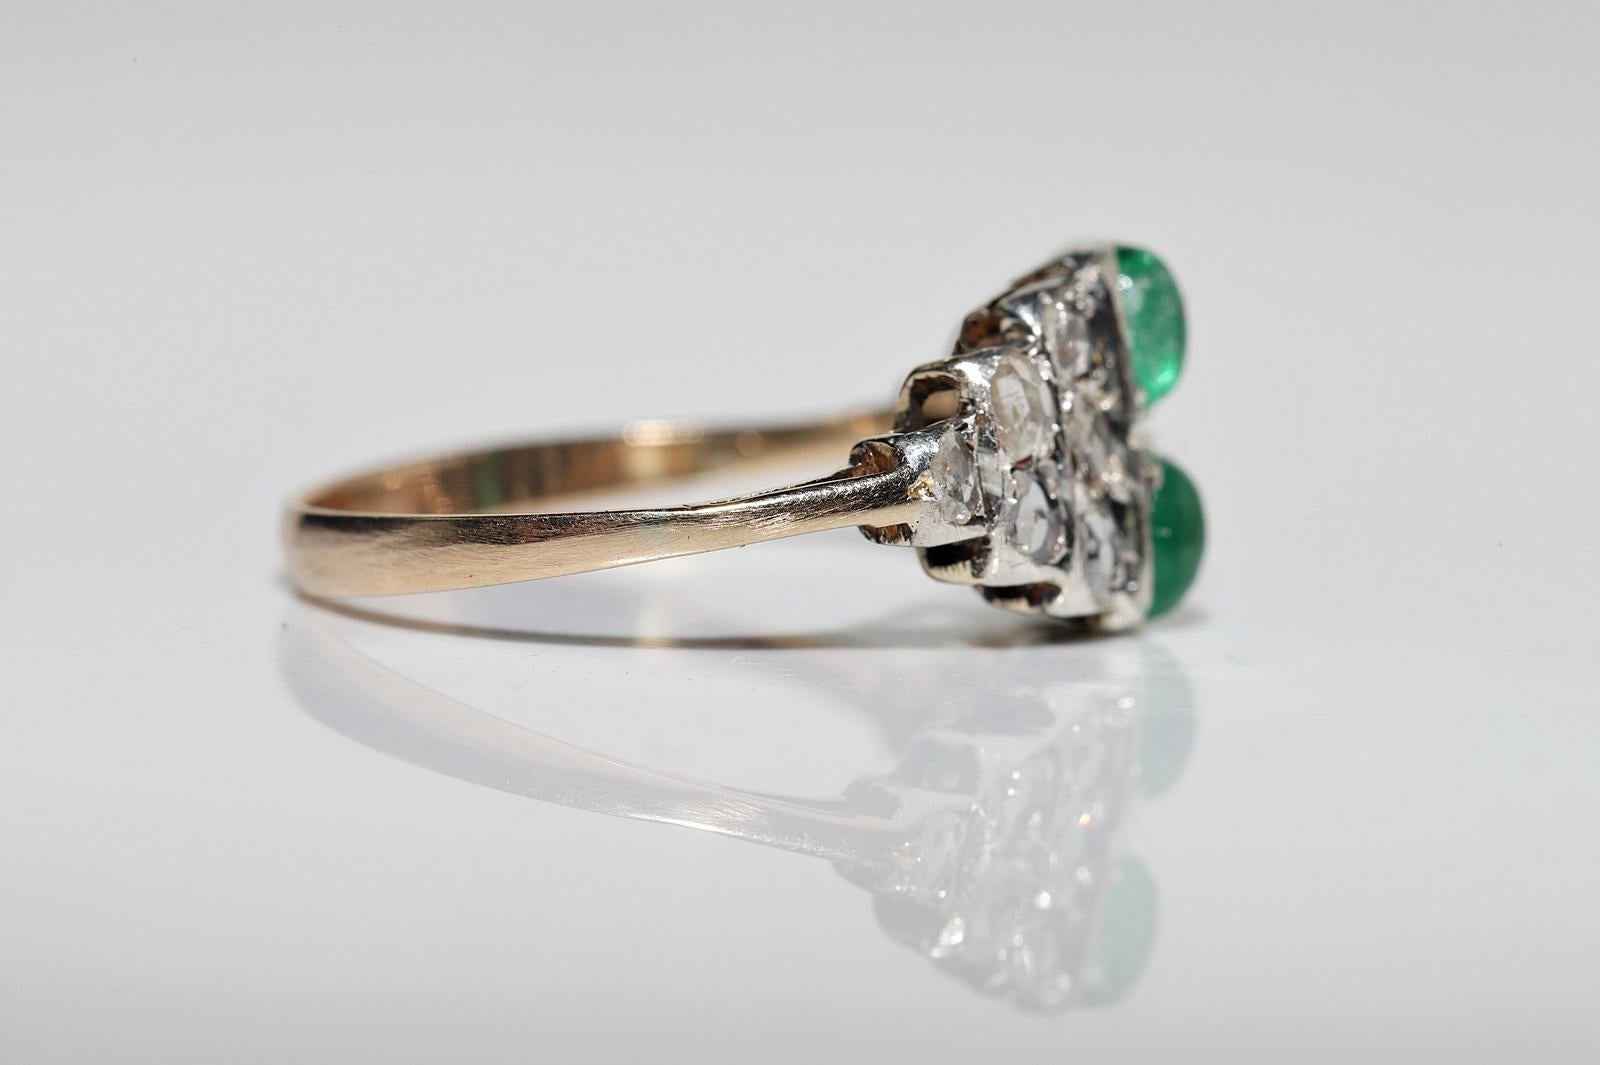 Antique Circa 1900s 14k Gold Top Silver Natural Rose Cut Diamond Emerald Ring For Sale 4